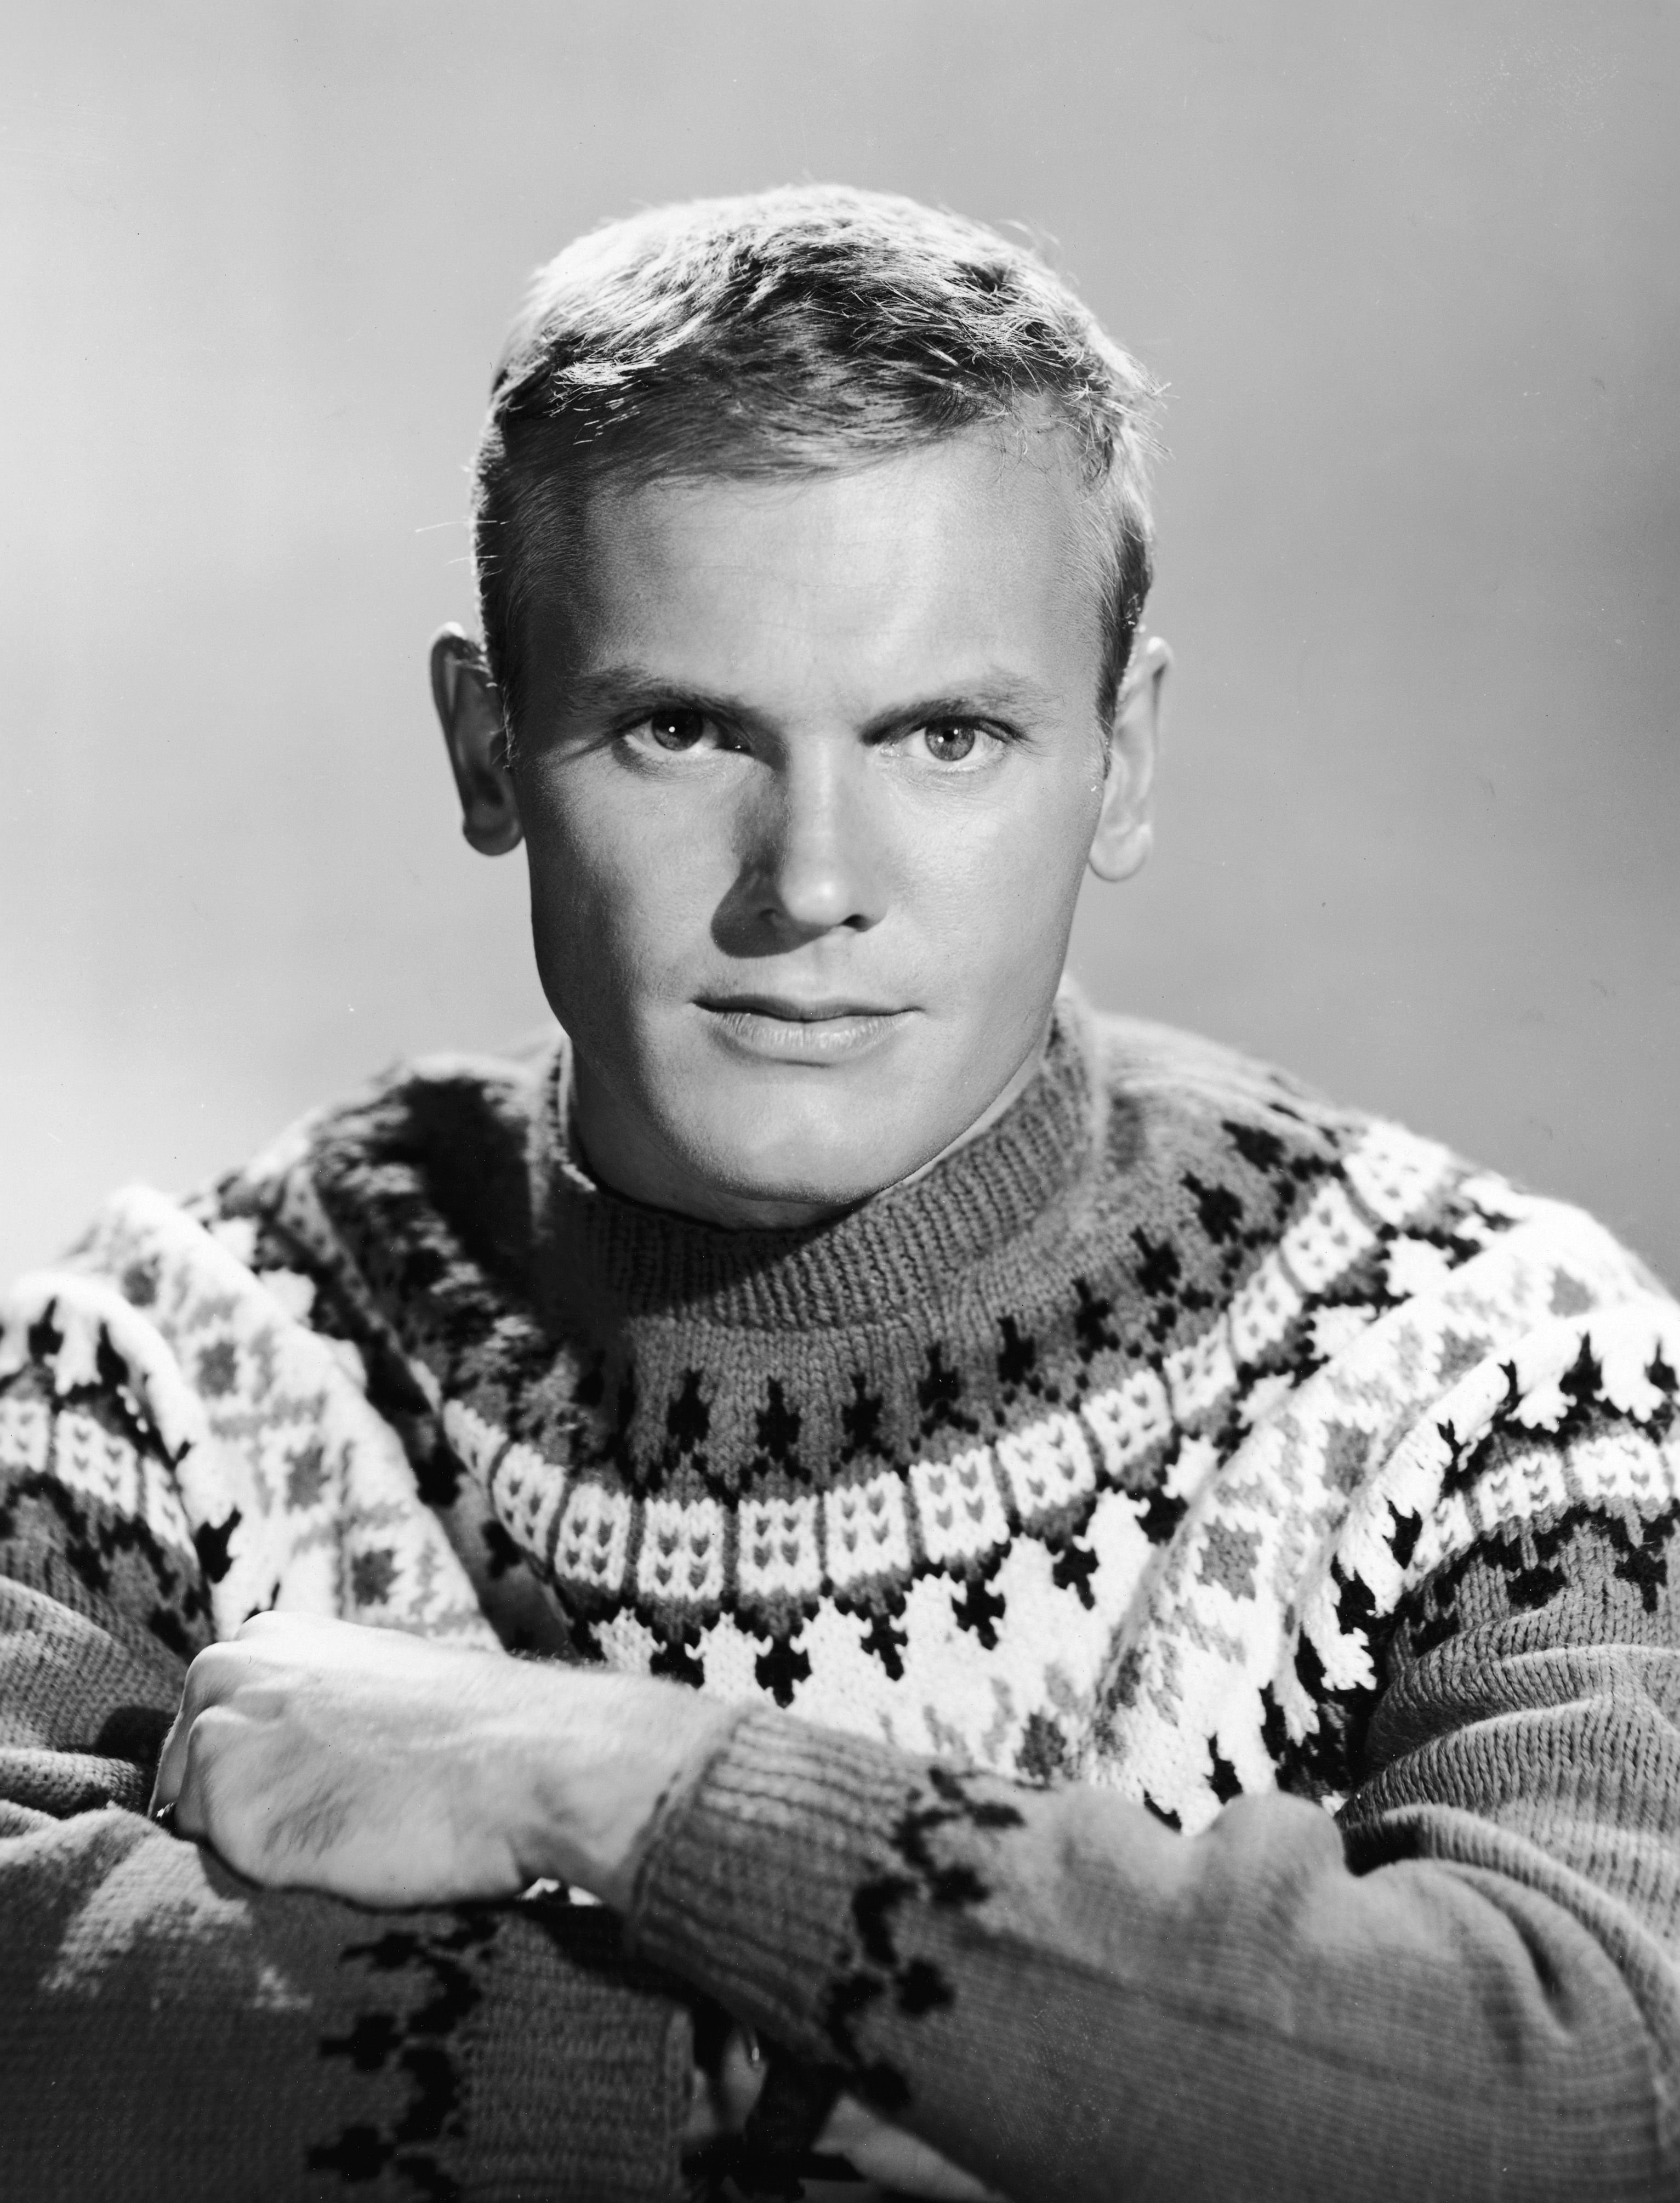  Tab Hunter wearing a ski sweater in a promotional portrait for "The Tab Hunter Show" in 1960 | Photo: Getty Images